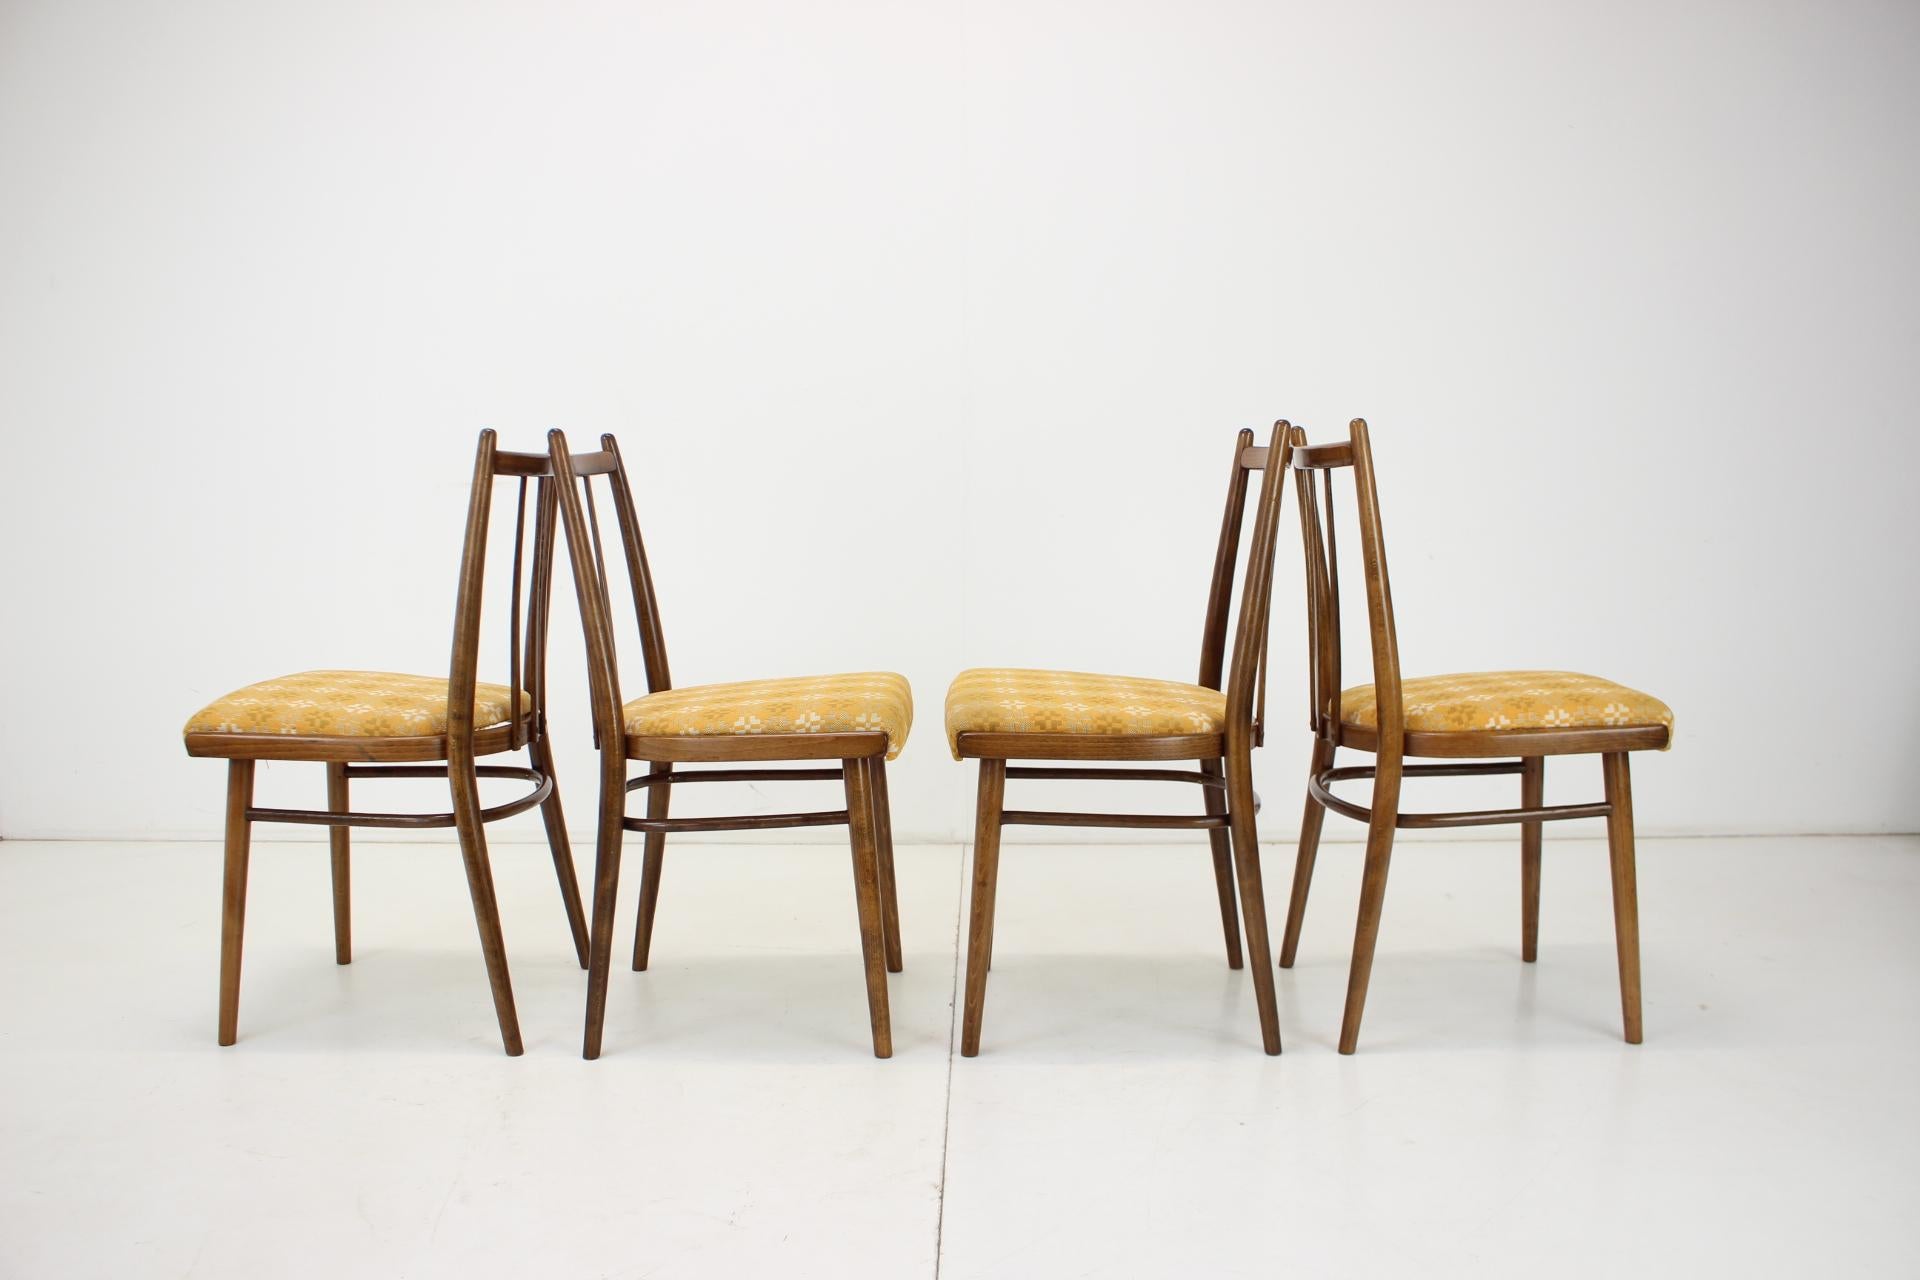 Fabric 1970s Set of Four Dining Chairs by Jitona, Czechoslovakia For Sale